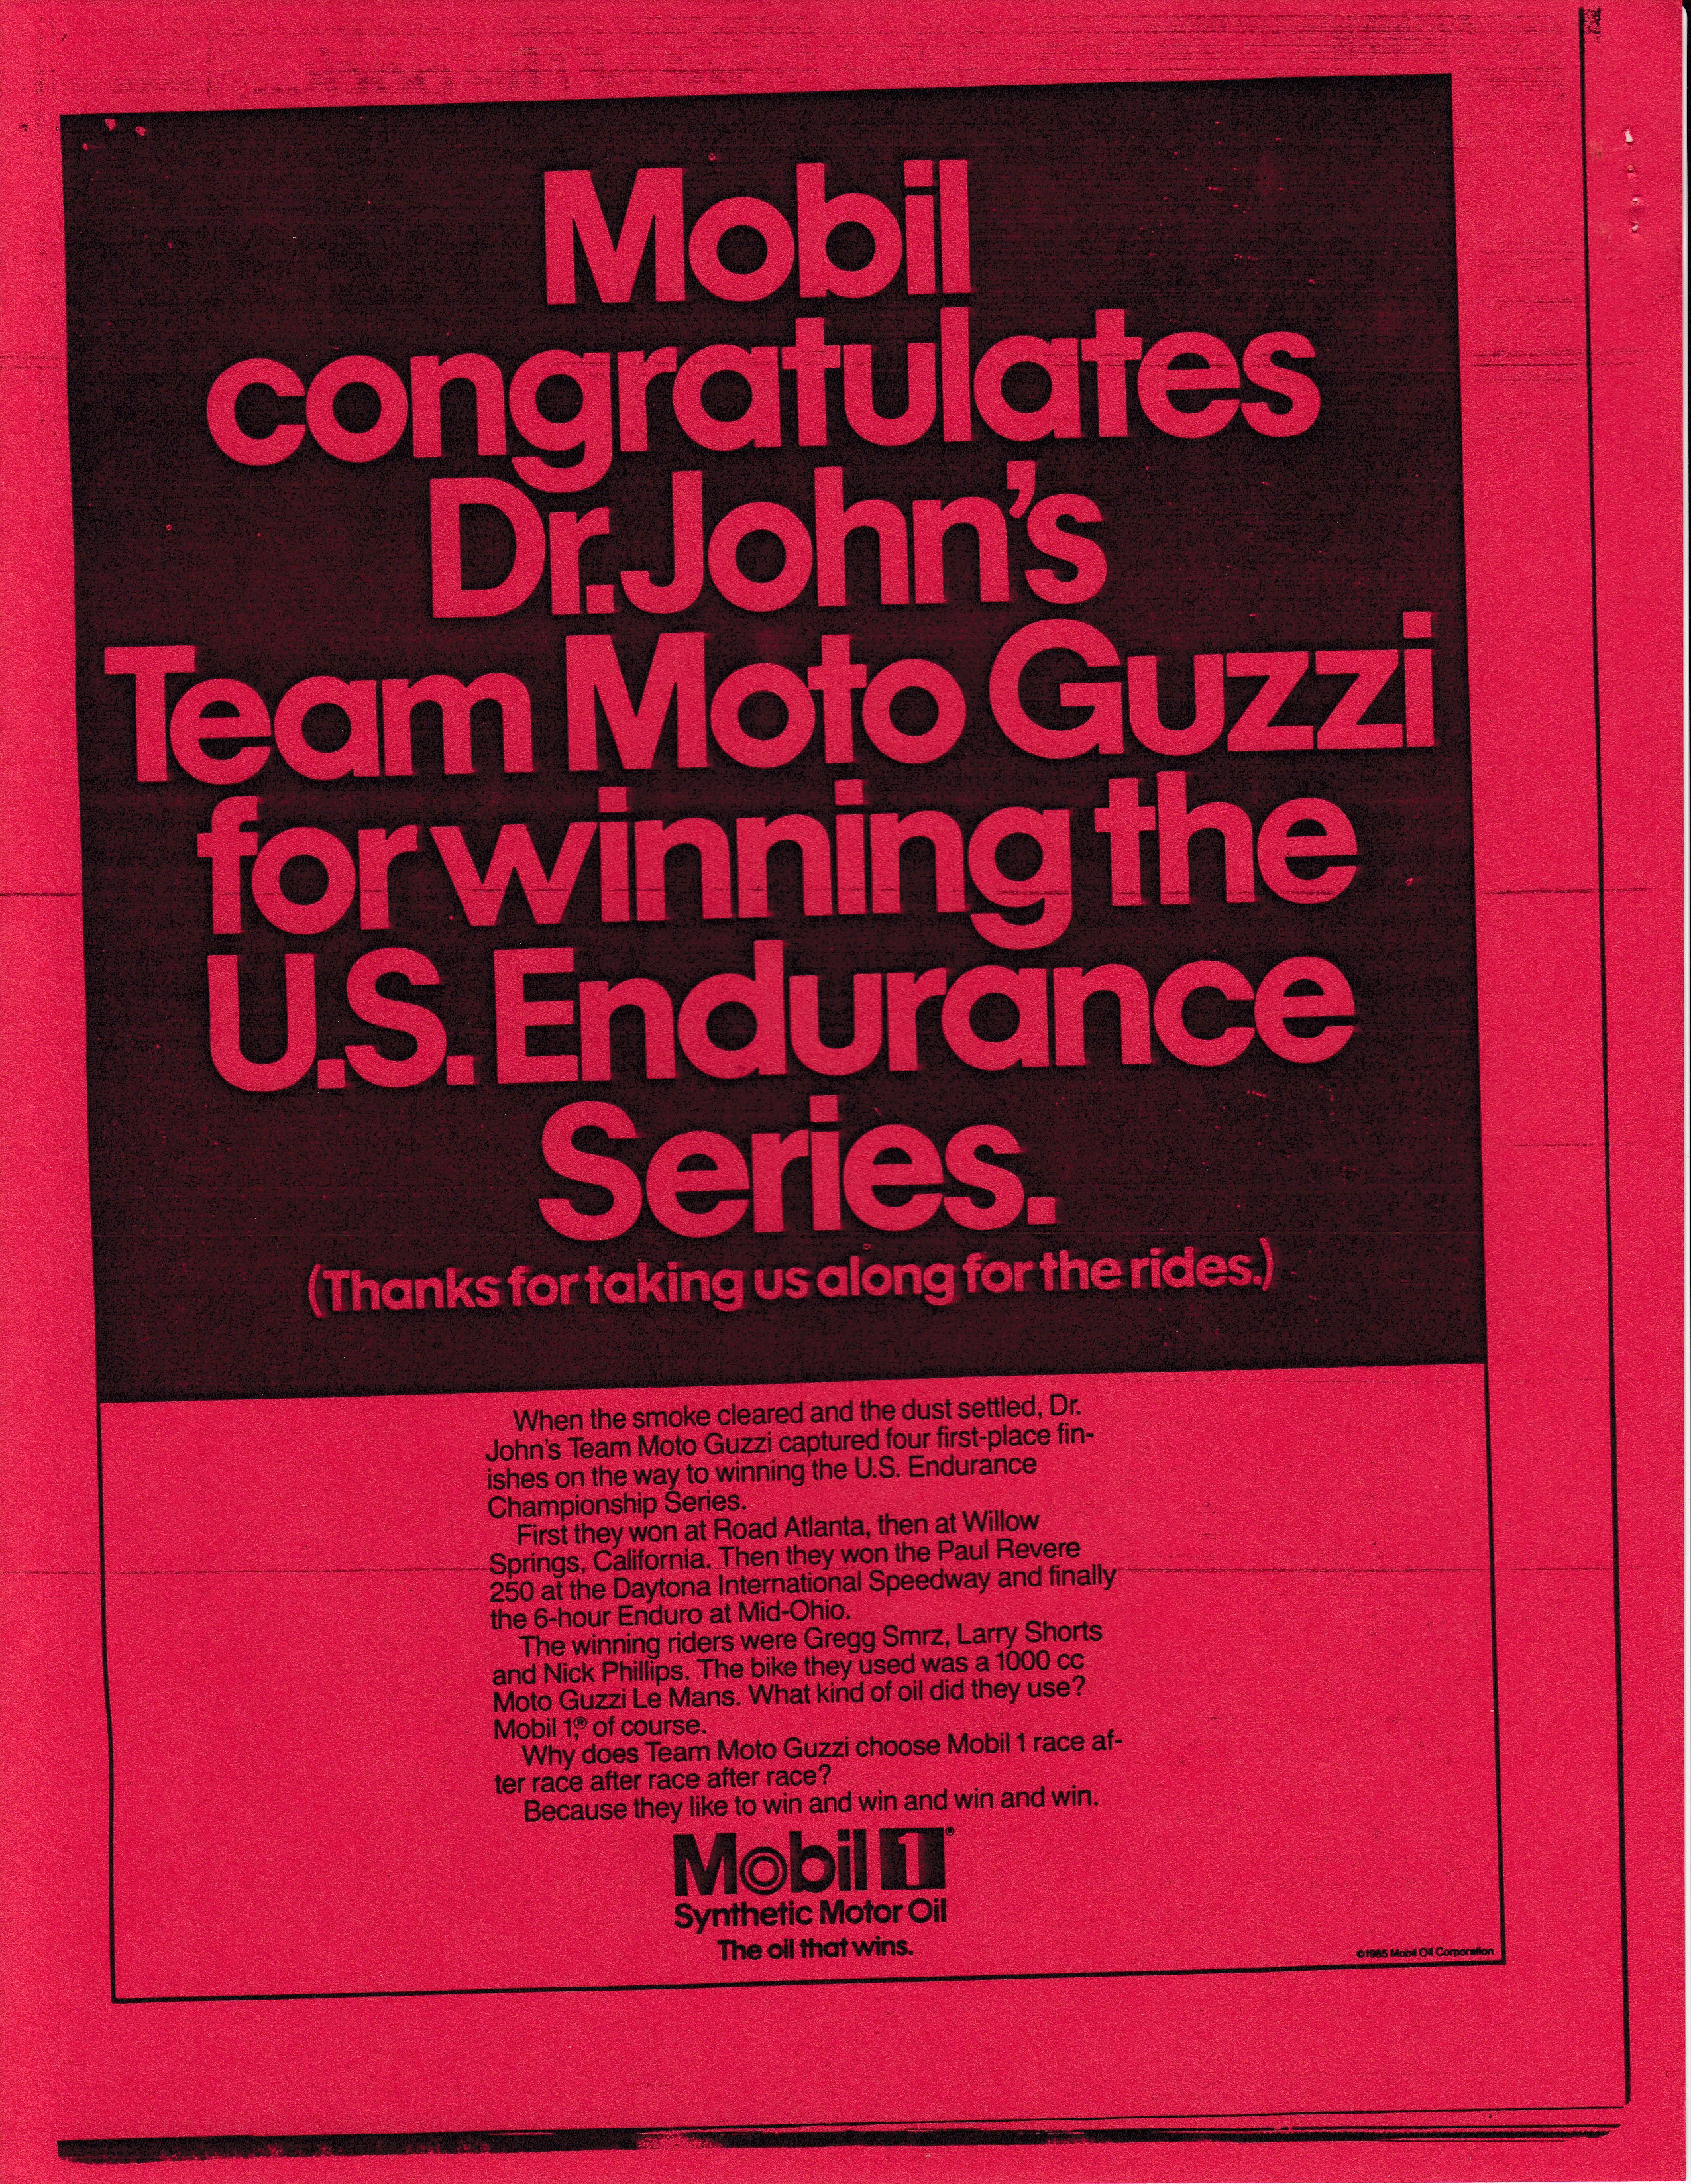 Article - American Motorcyclist (1986 January) Who are those guys? Dr. John's team rides a Guzzi to glory in endurance racing